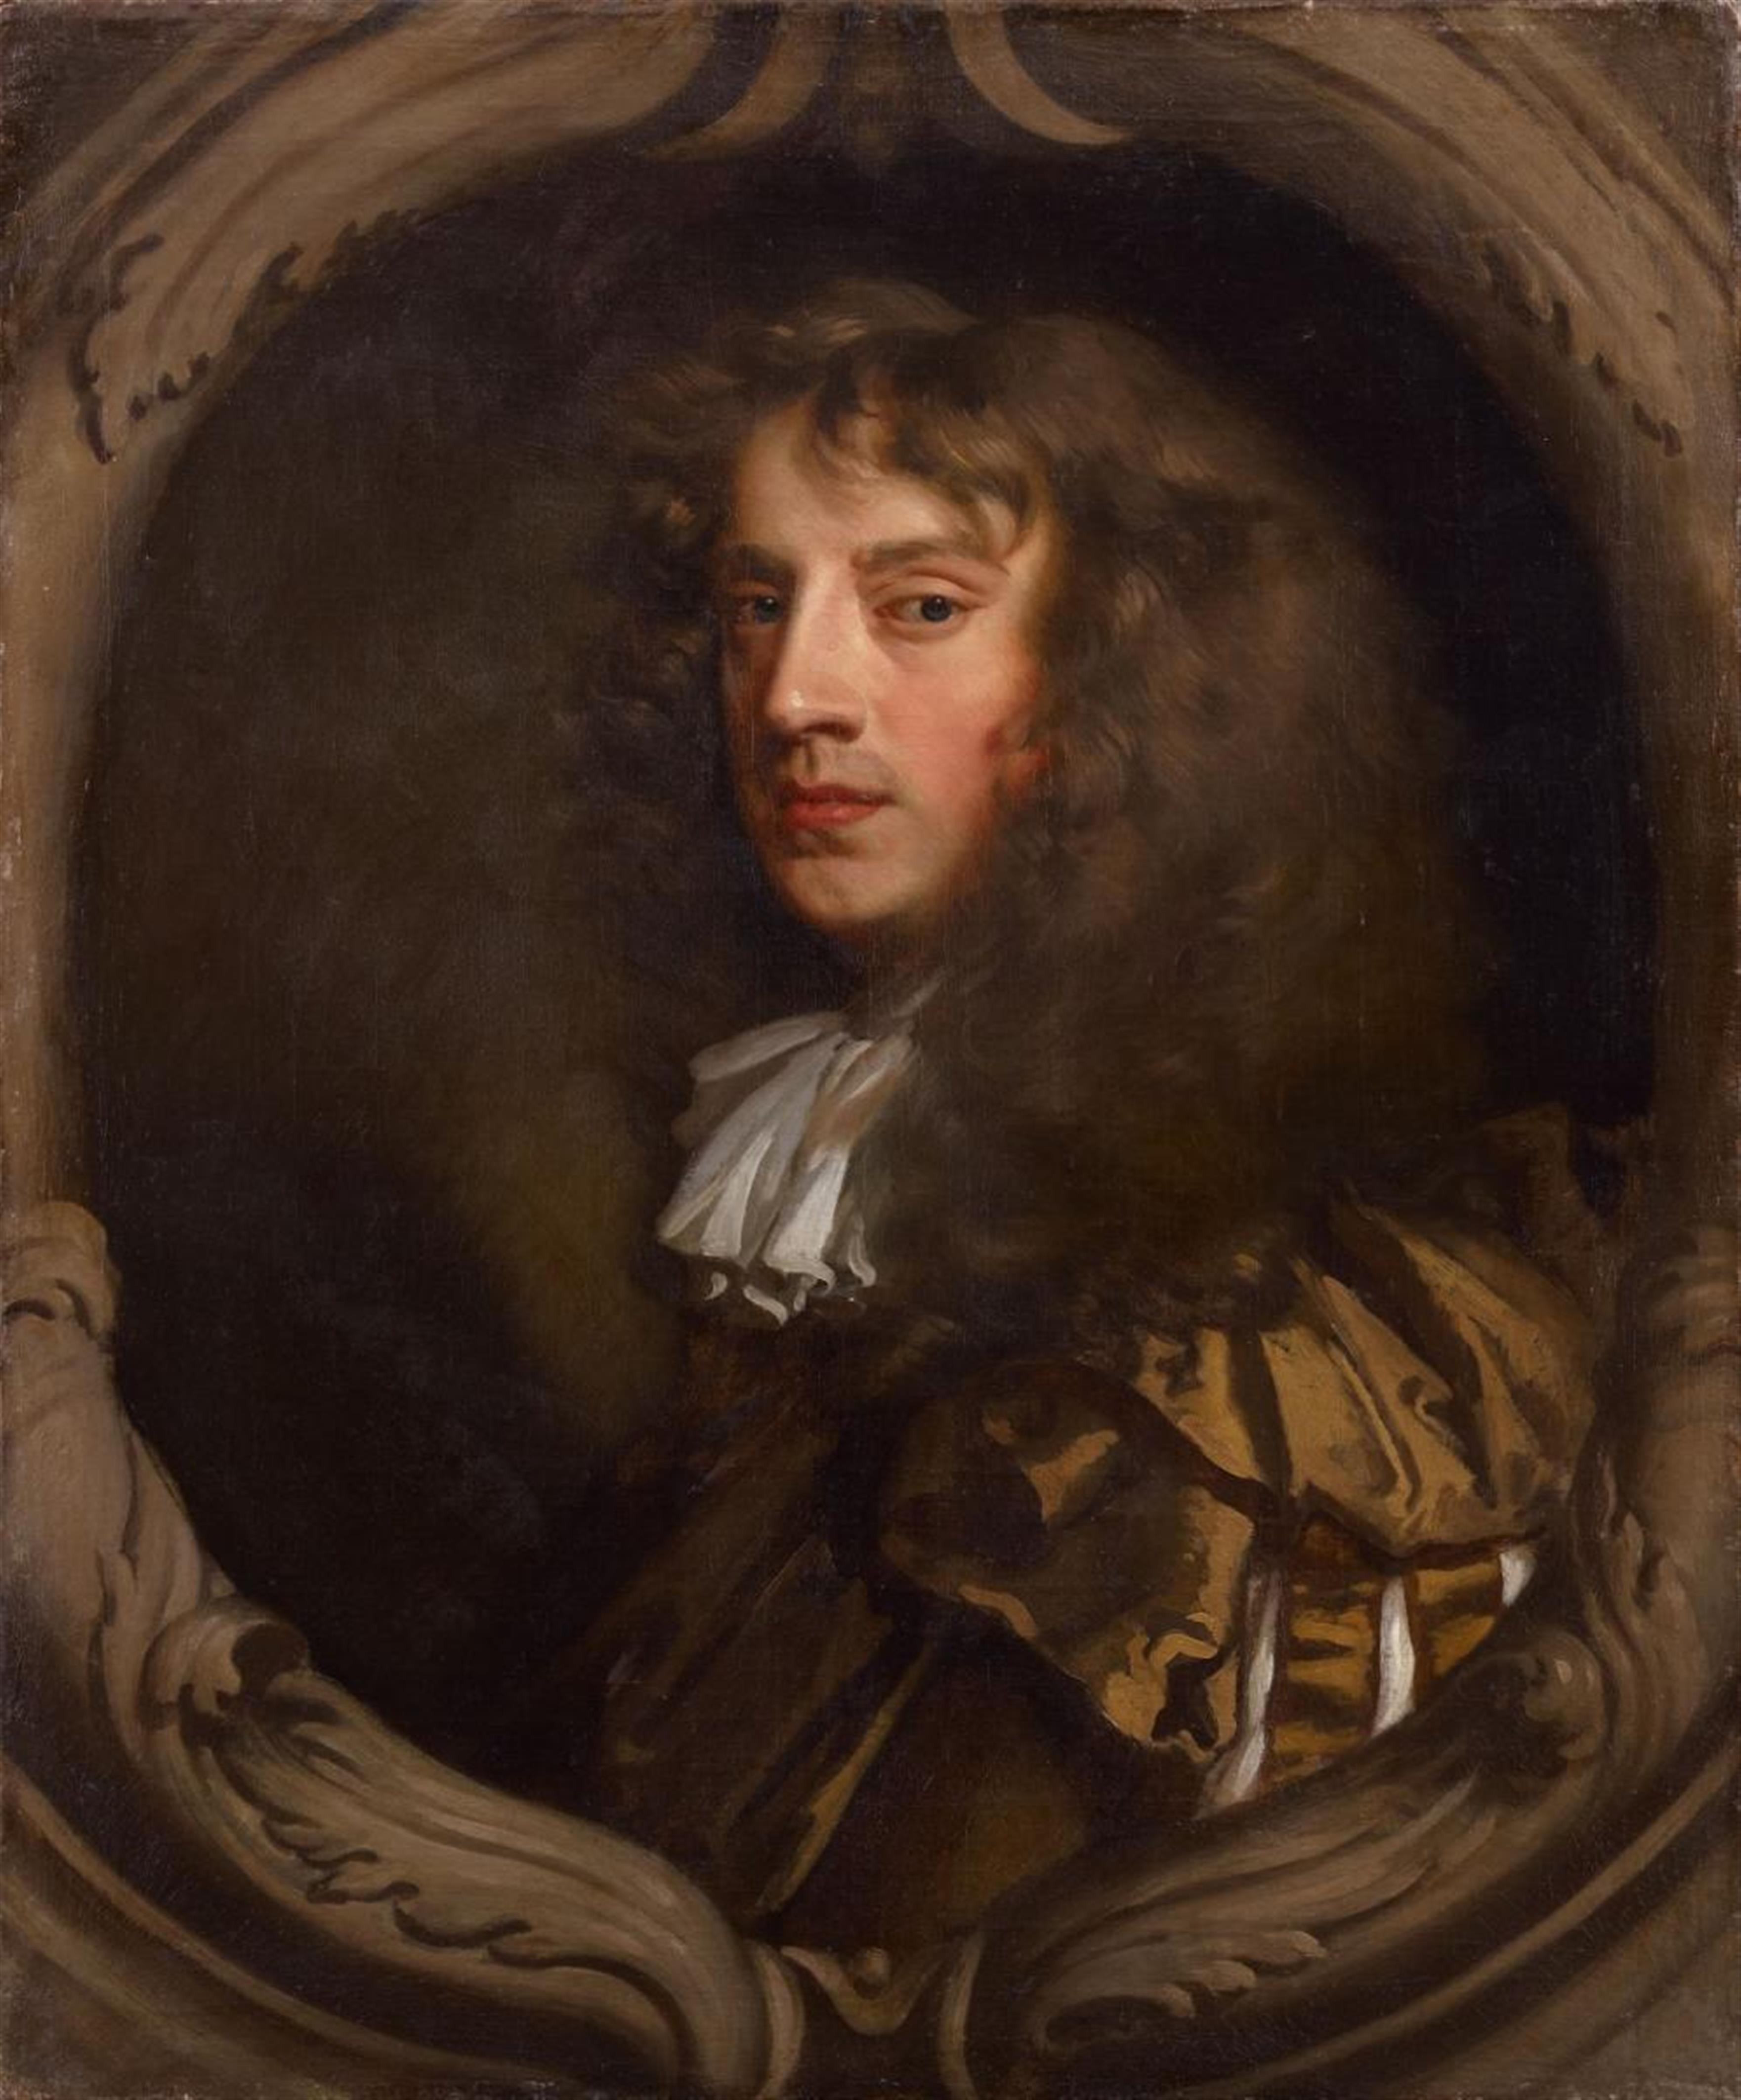 Sir Peter Lely, circle of - PORTRAIT OF SIR WILLIAM BOWYER, 2ND BARONET OF DENHAM - image-1